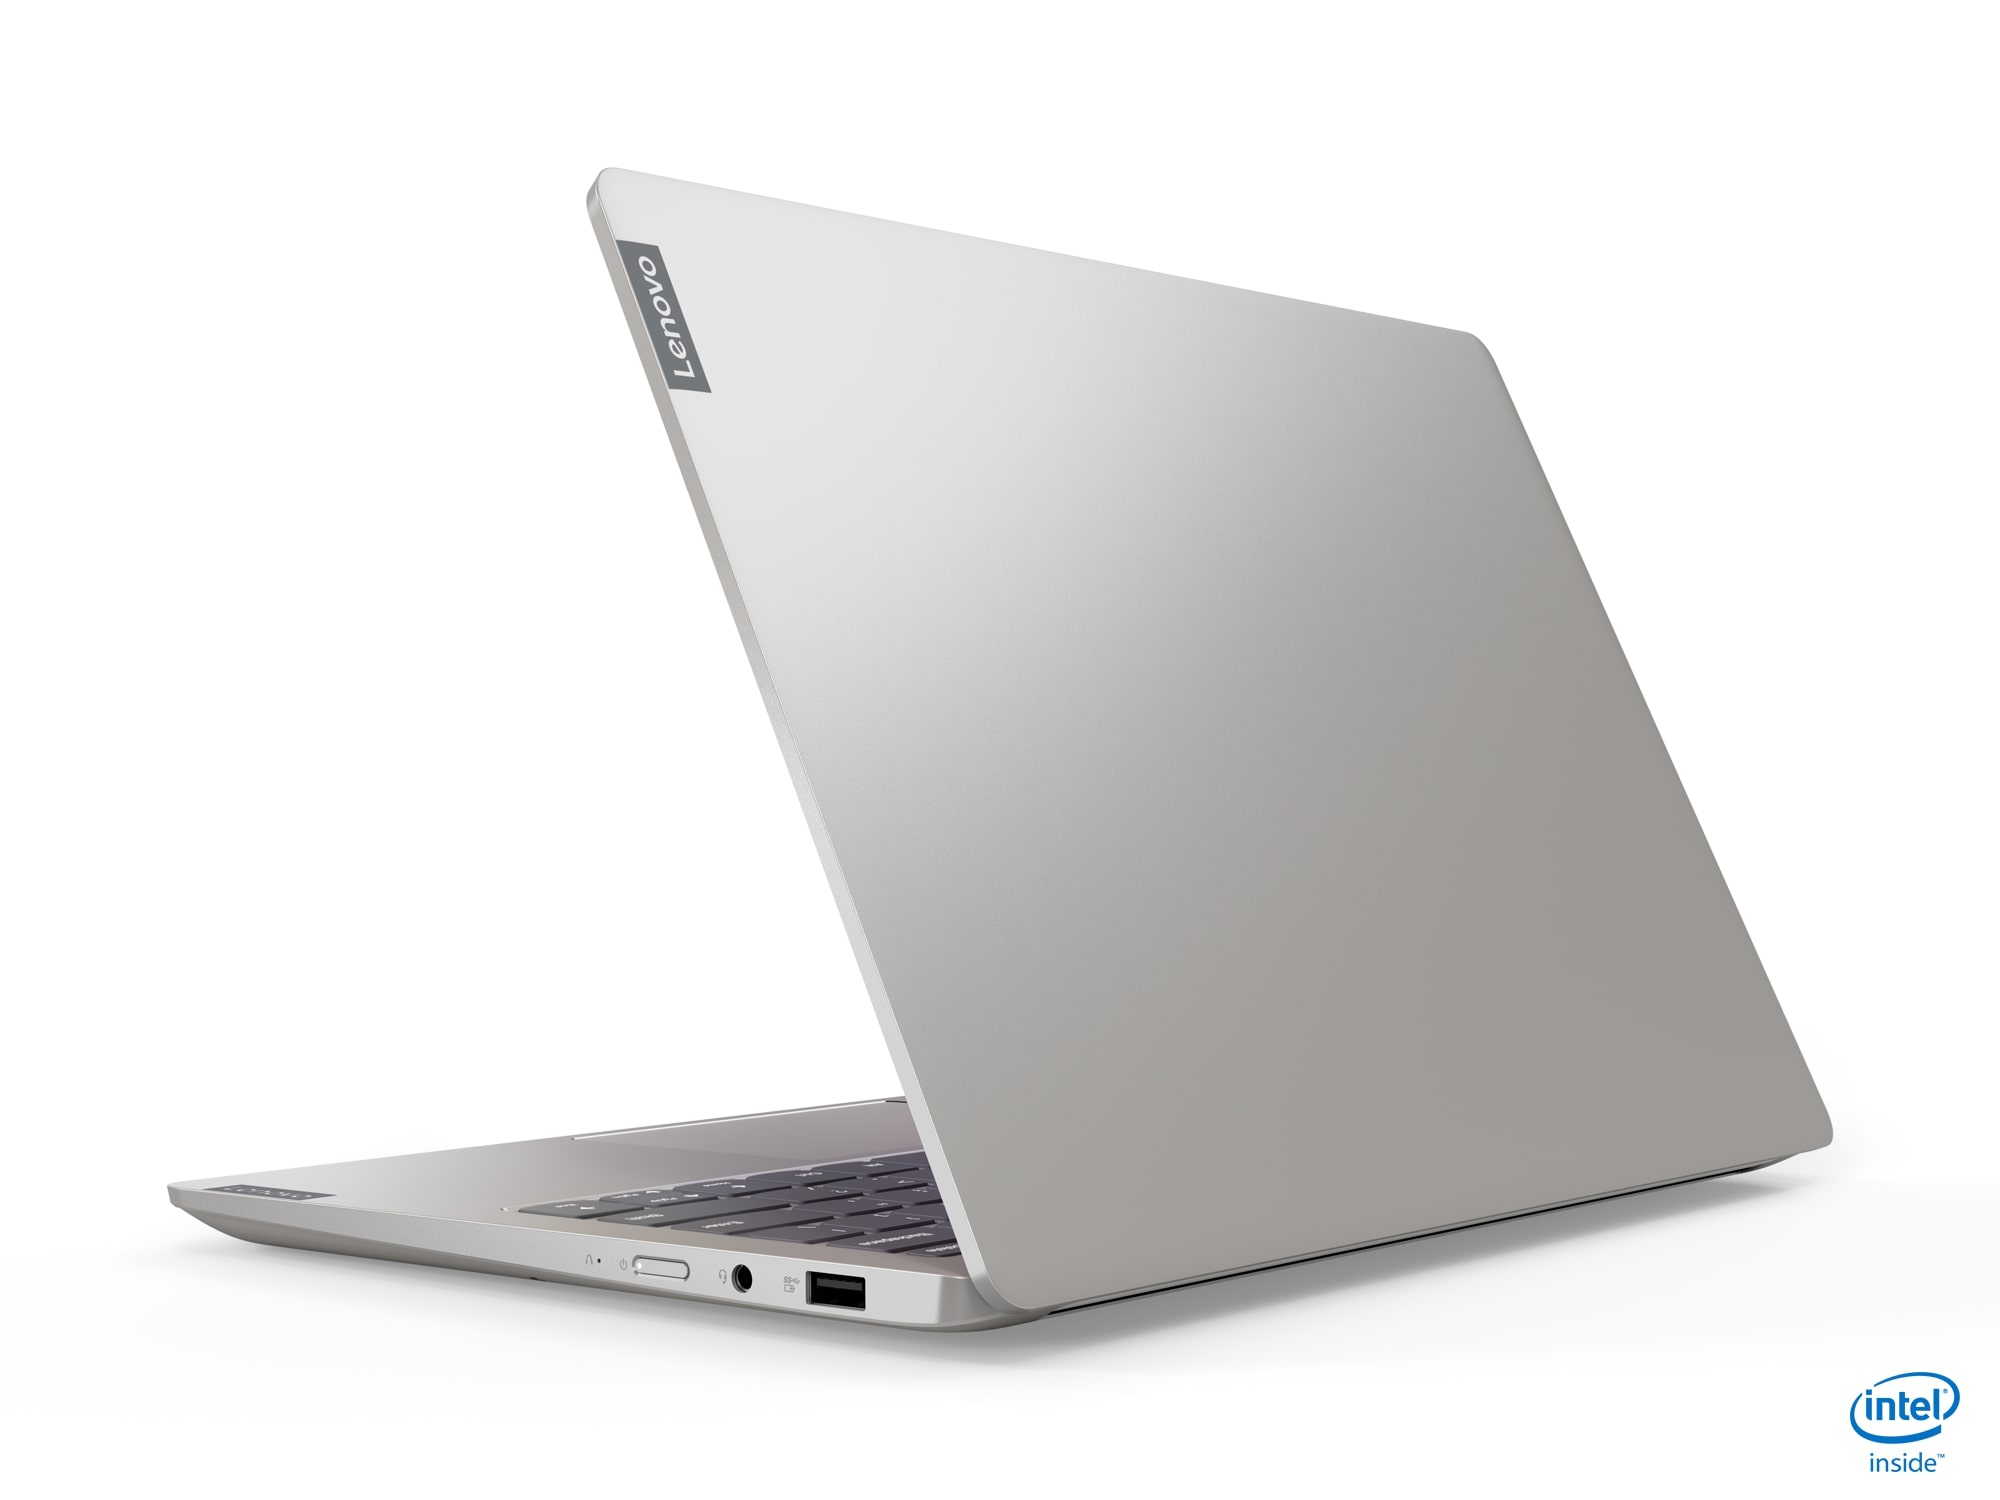 lenovo takes on xps 13 with ideapad s540 13inch intel left silver